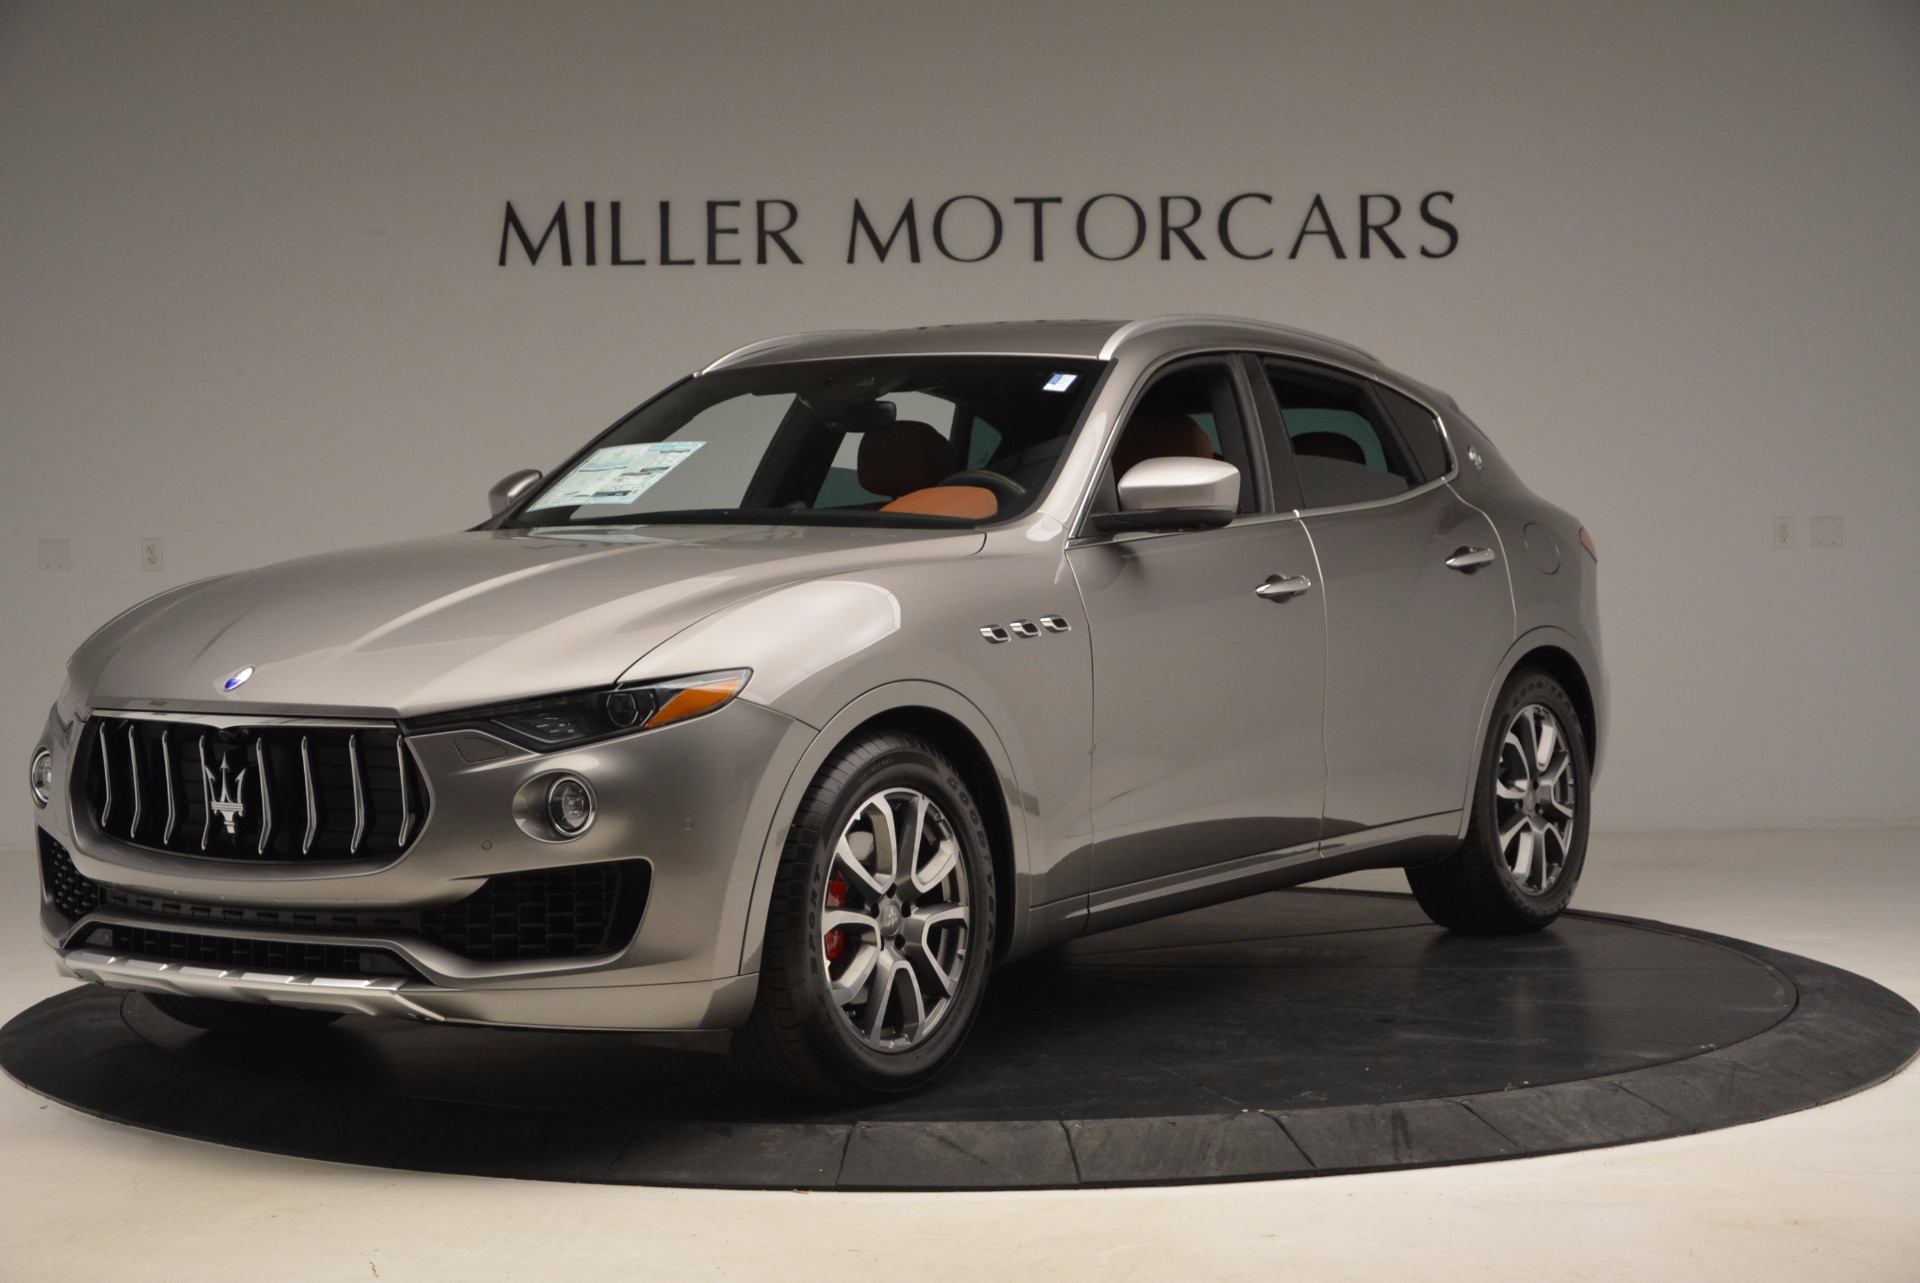 New 2017 Maserati Levante for sale Sold at Bentley Greenwich in Greenwich CT 06830 1